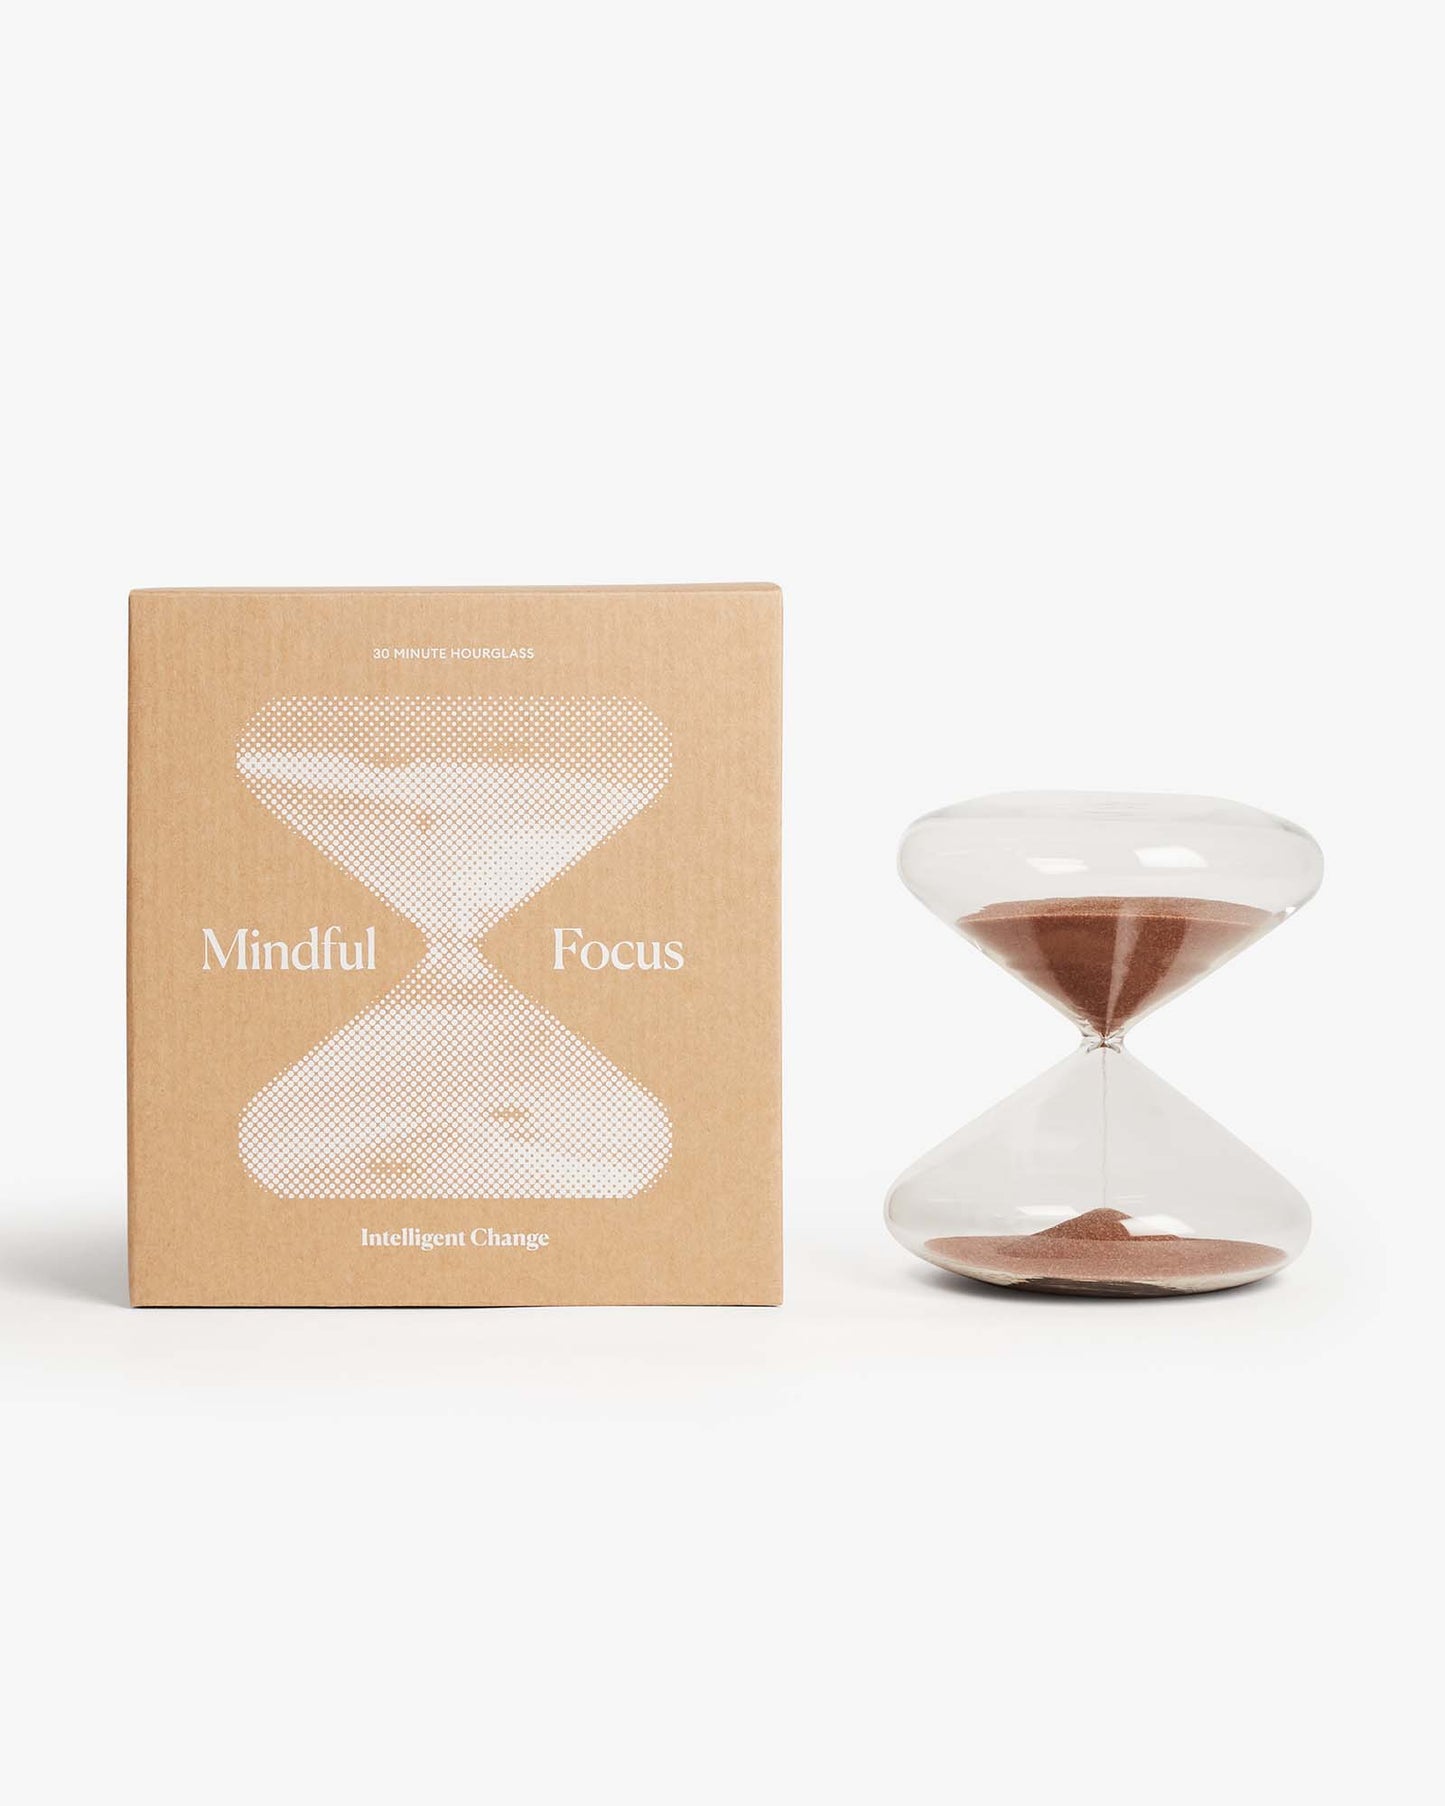 Mindful Focus Hourglass - 30 Minutes by Intelligent Change